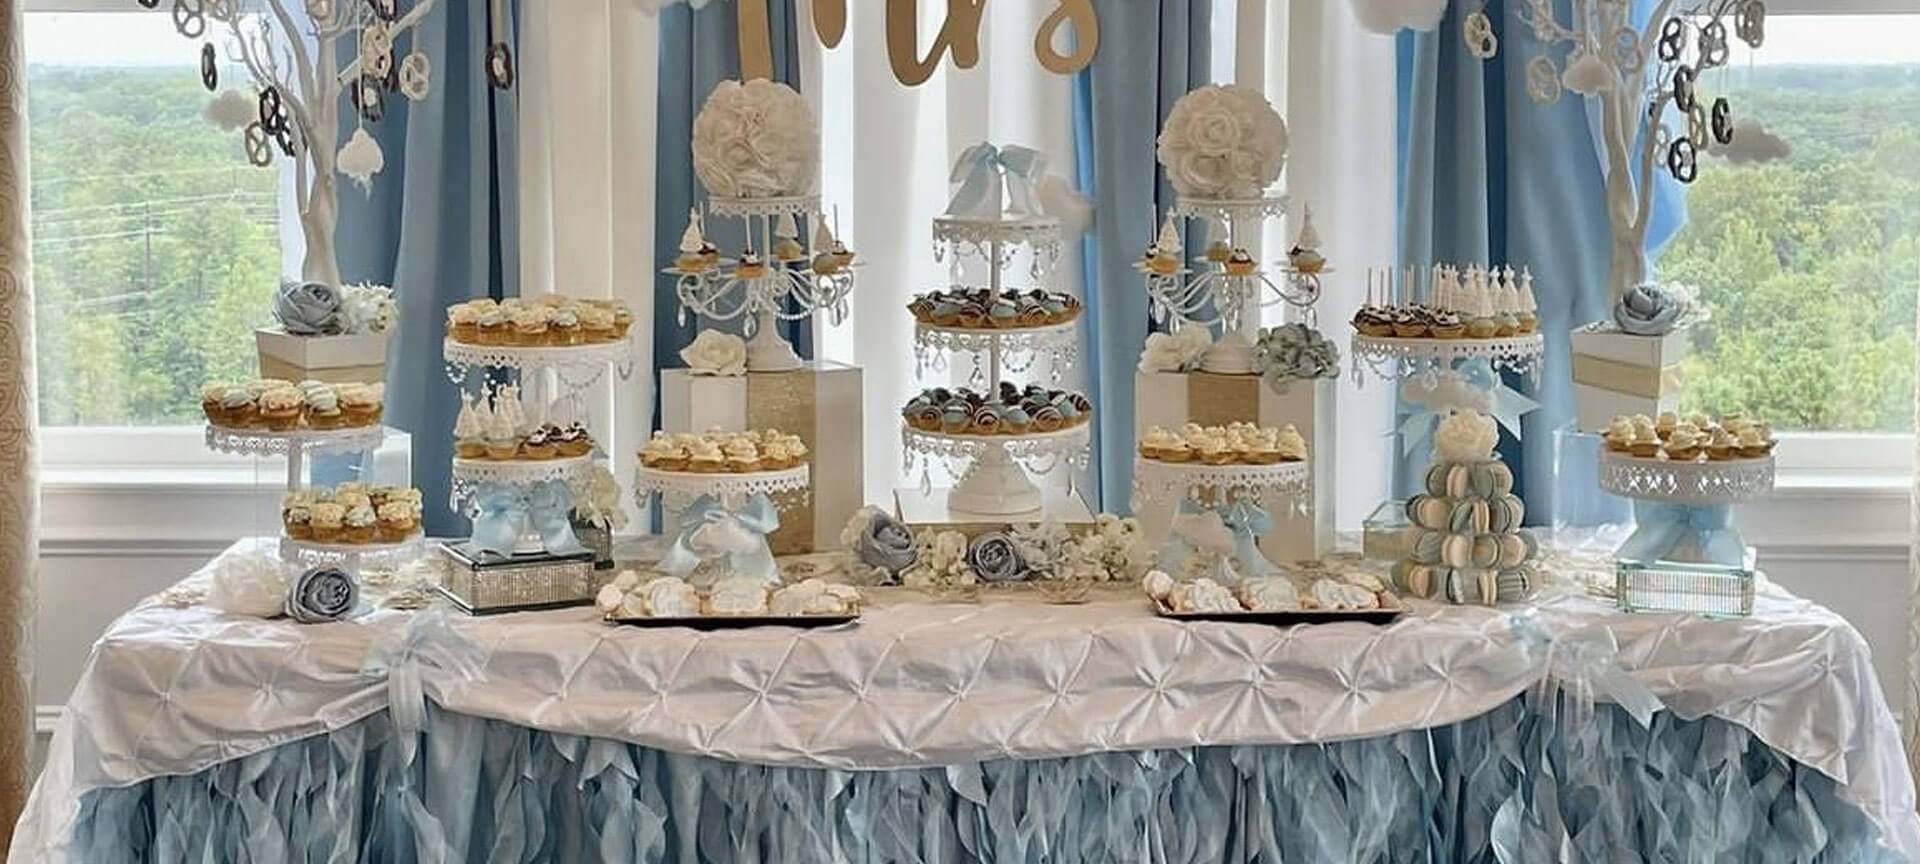 Lovely catering set-up with decorations